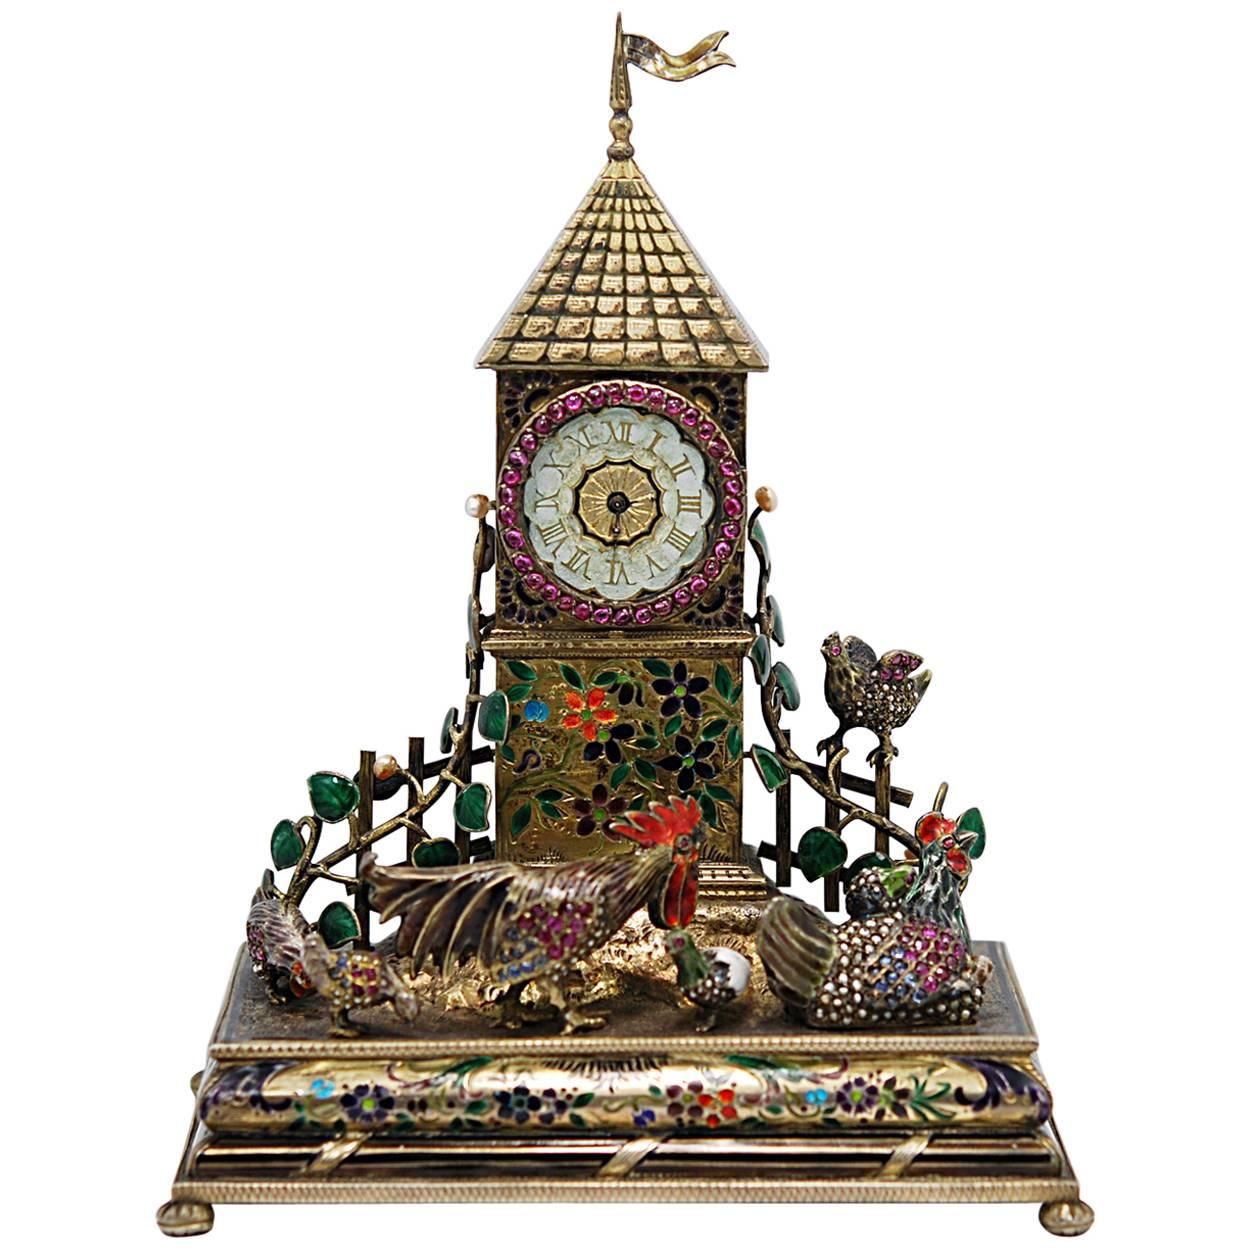 Viennese Jeweled Silver Gilt Tower Clock with Barnyard Animals in the Foreground